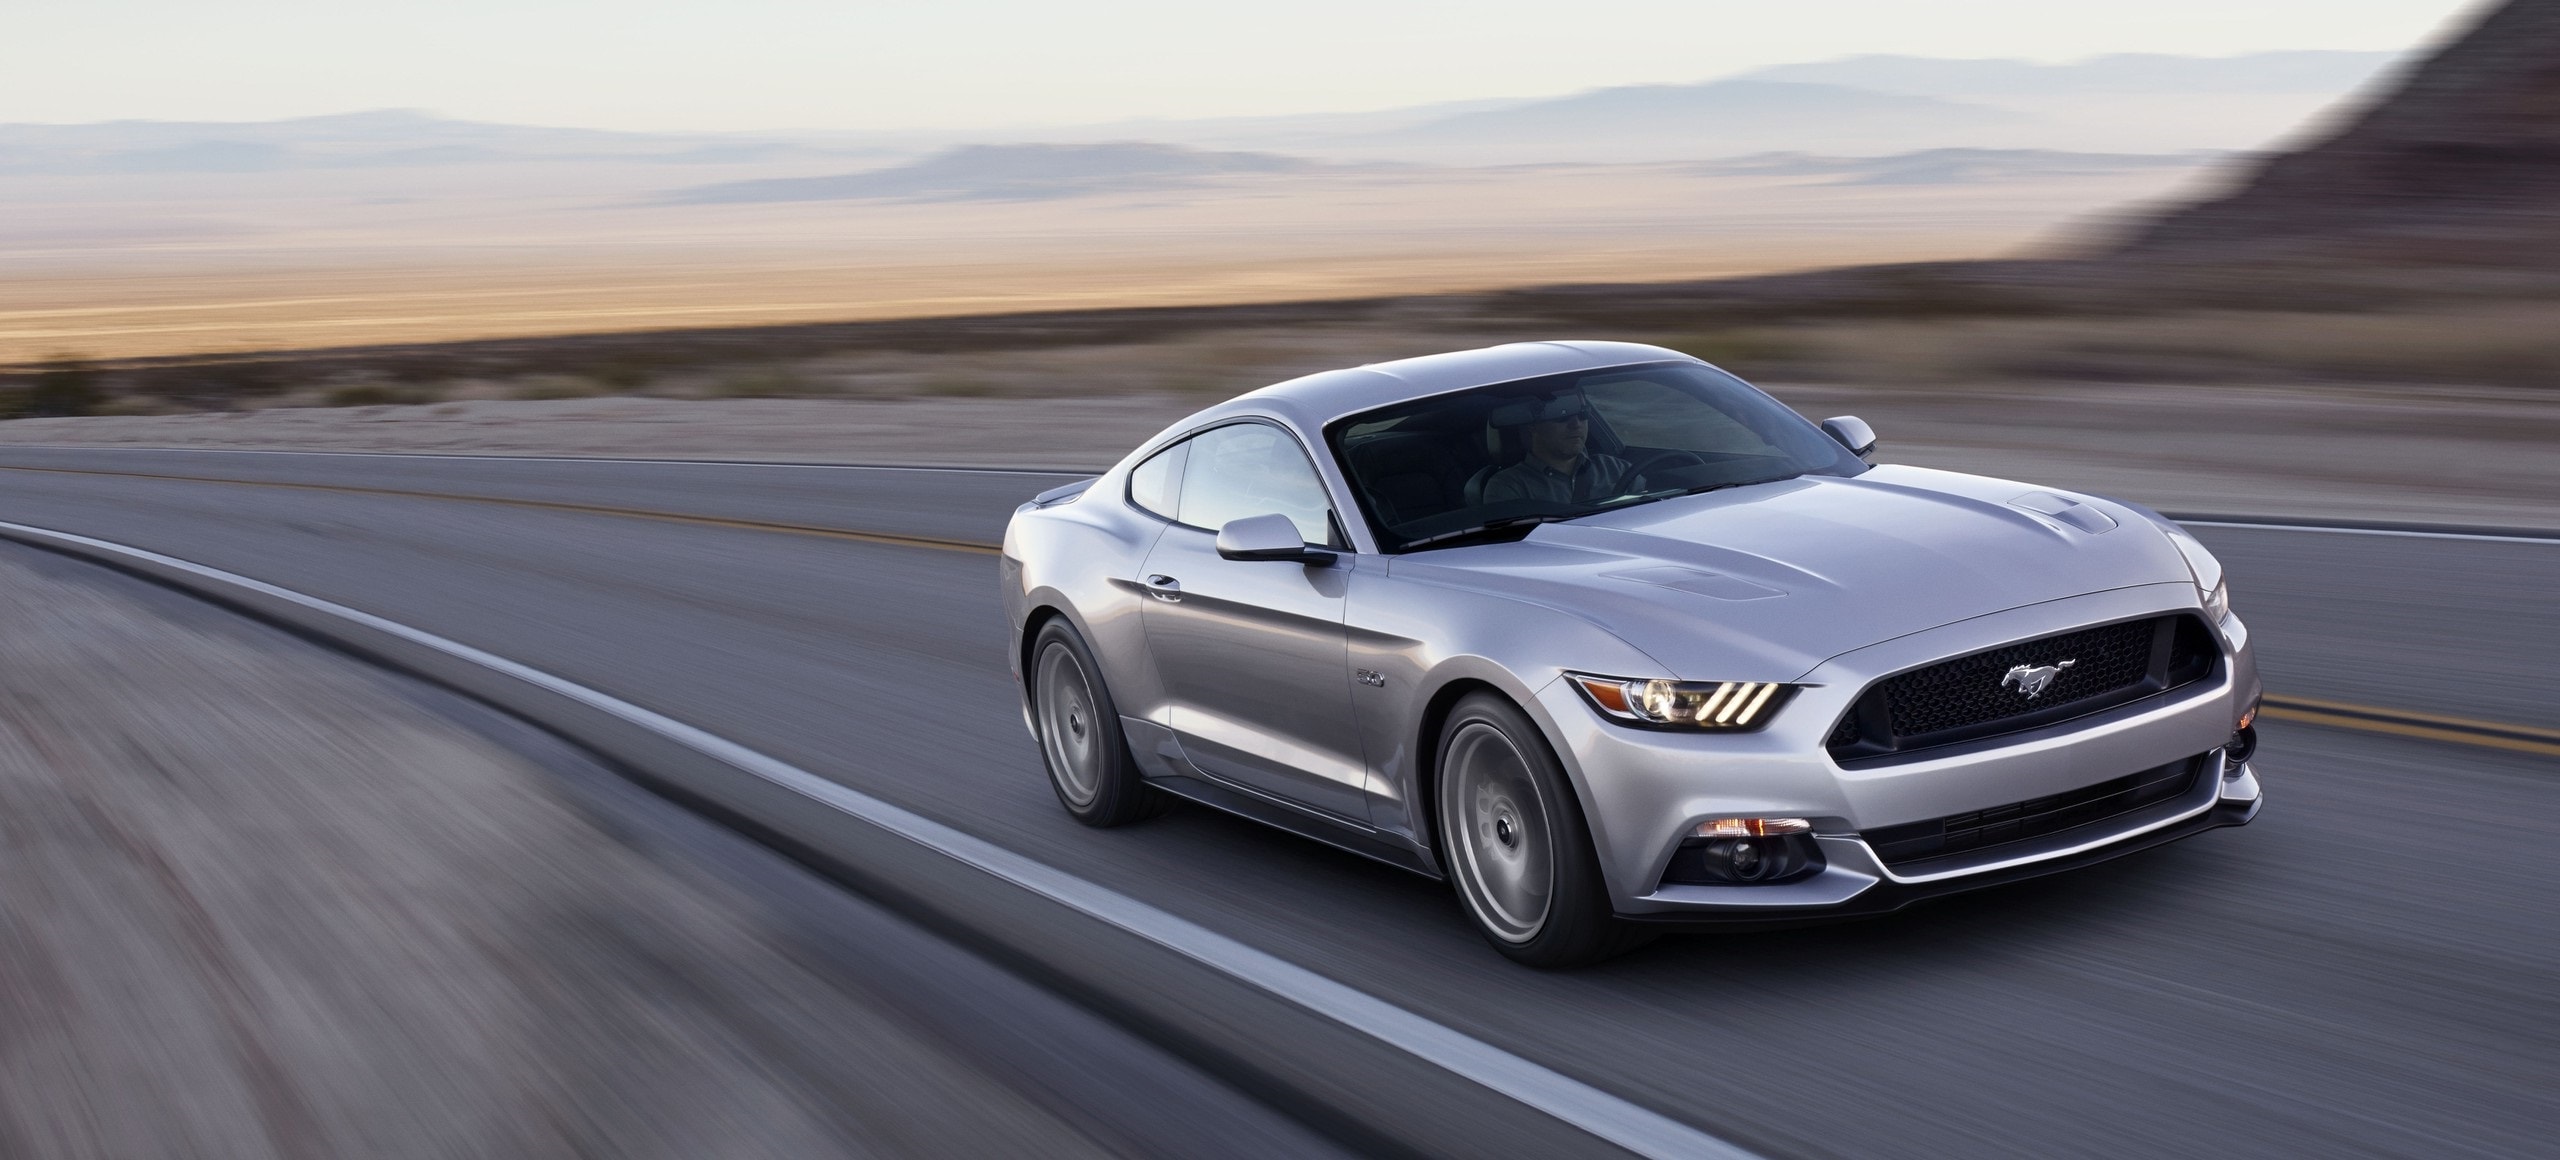 Ford Mustang Gt Wallpaper - Ford Mustang Ecoboost 2020 , HD Wallpaper & Backgrounds